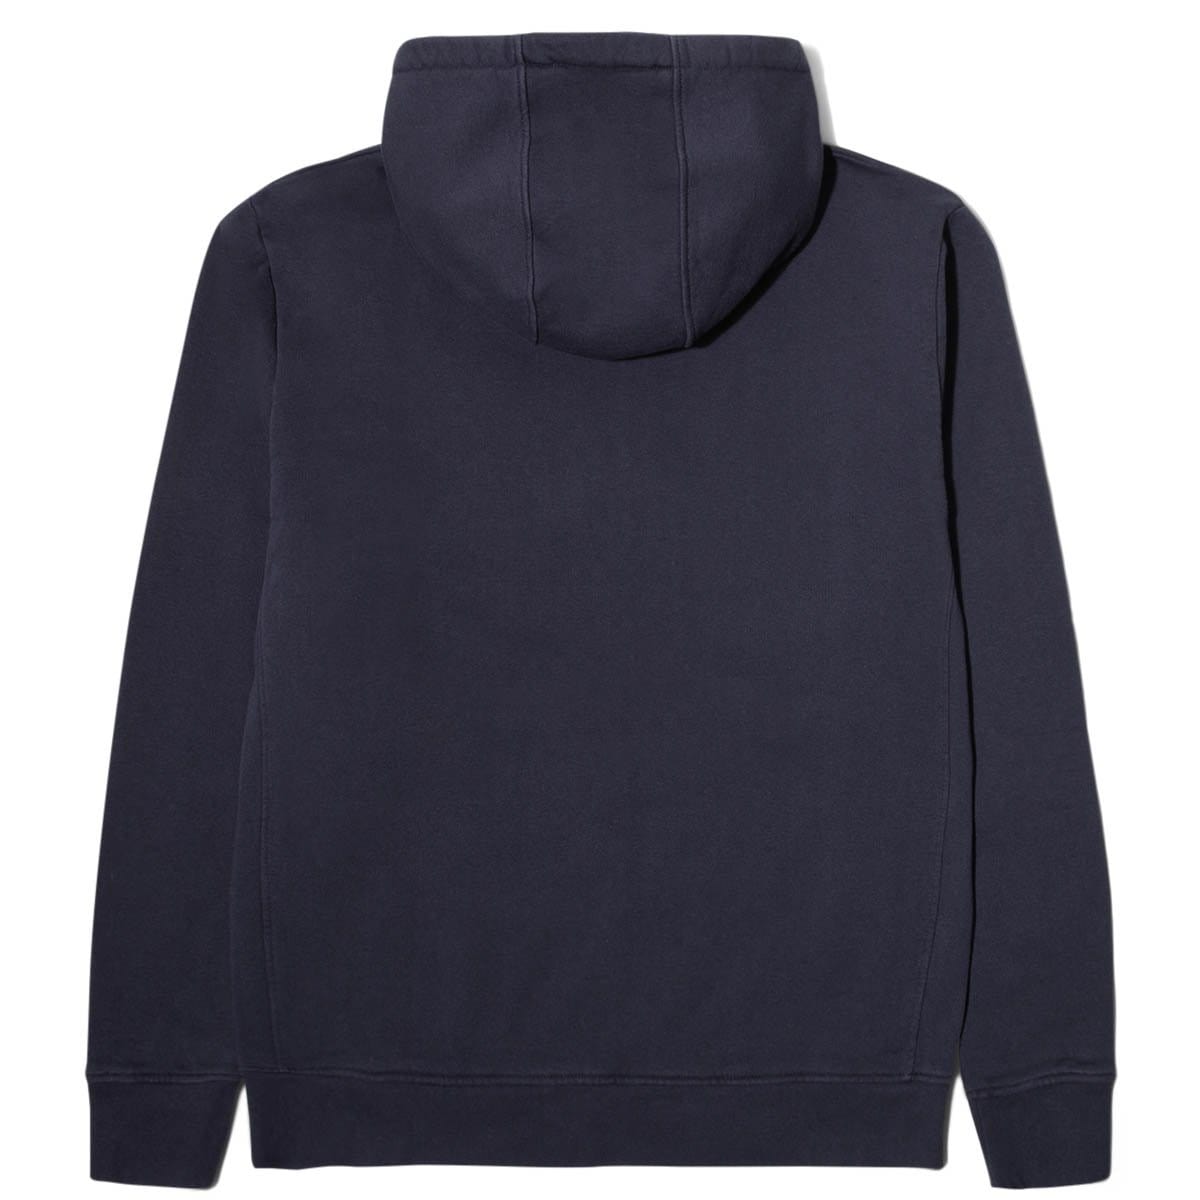 navy blue sweater without hoodie